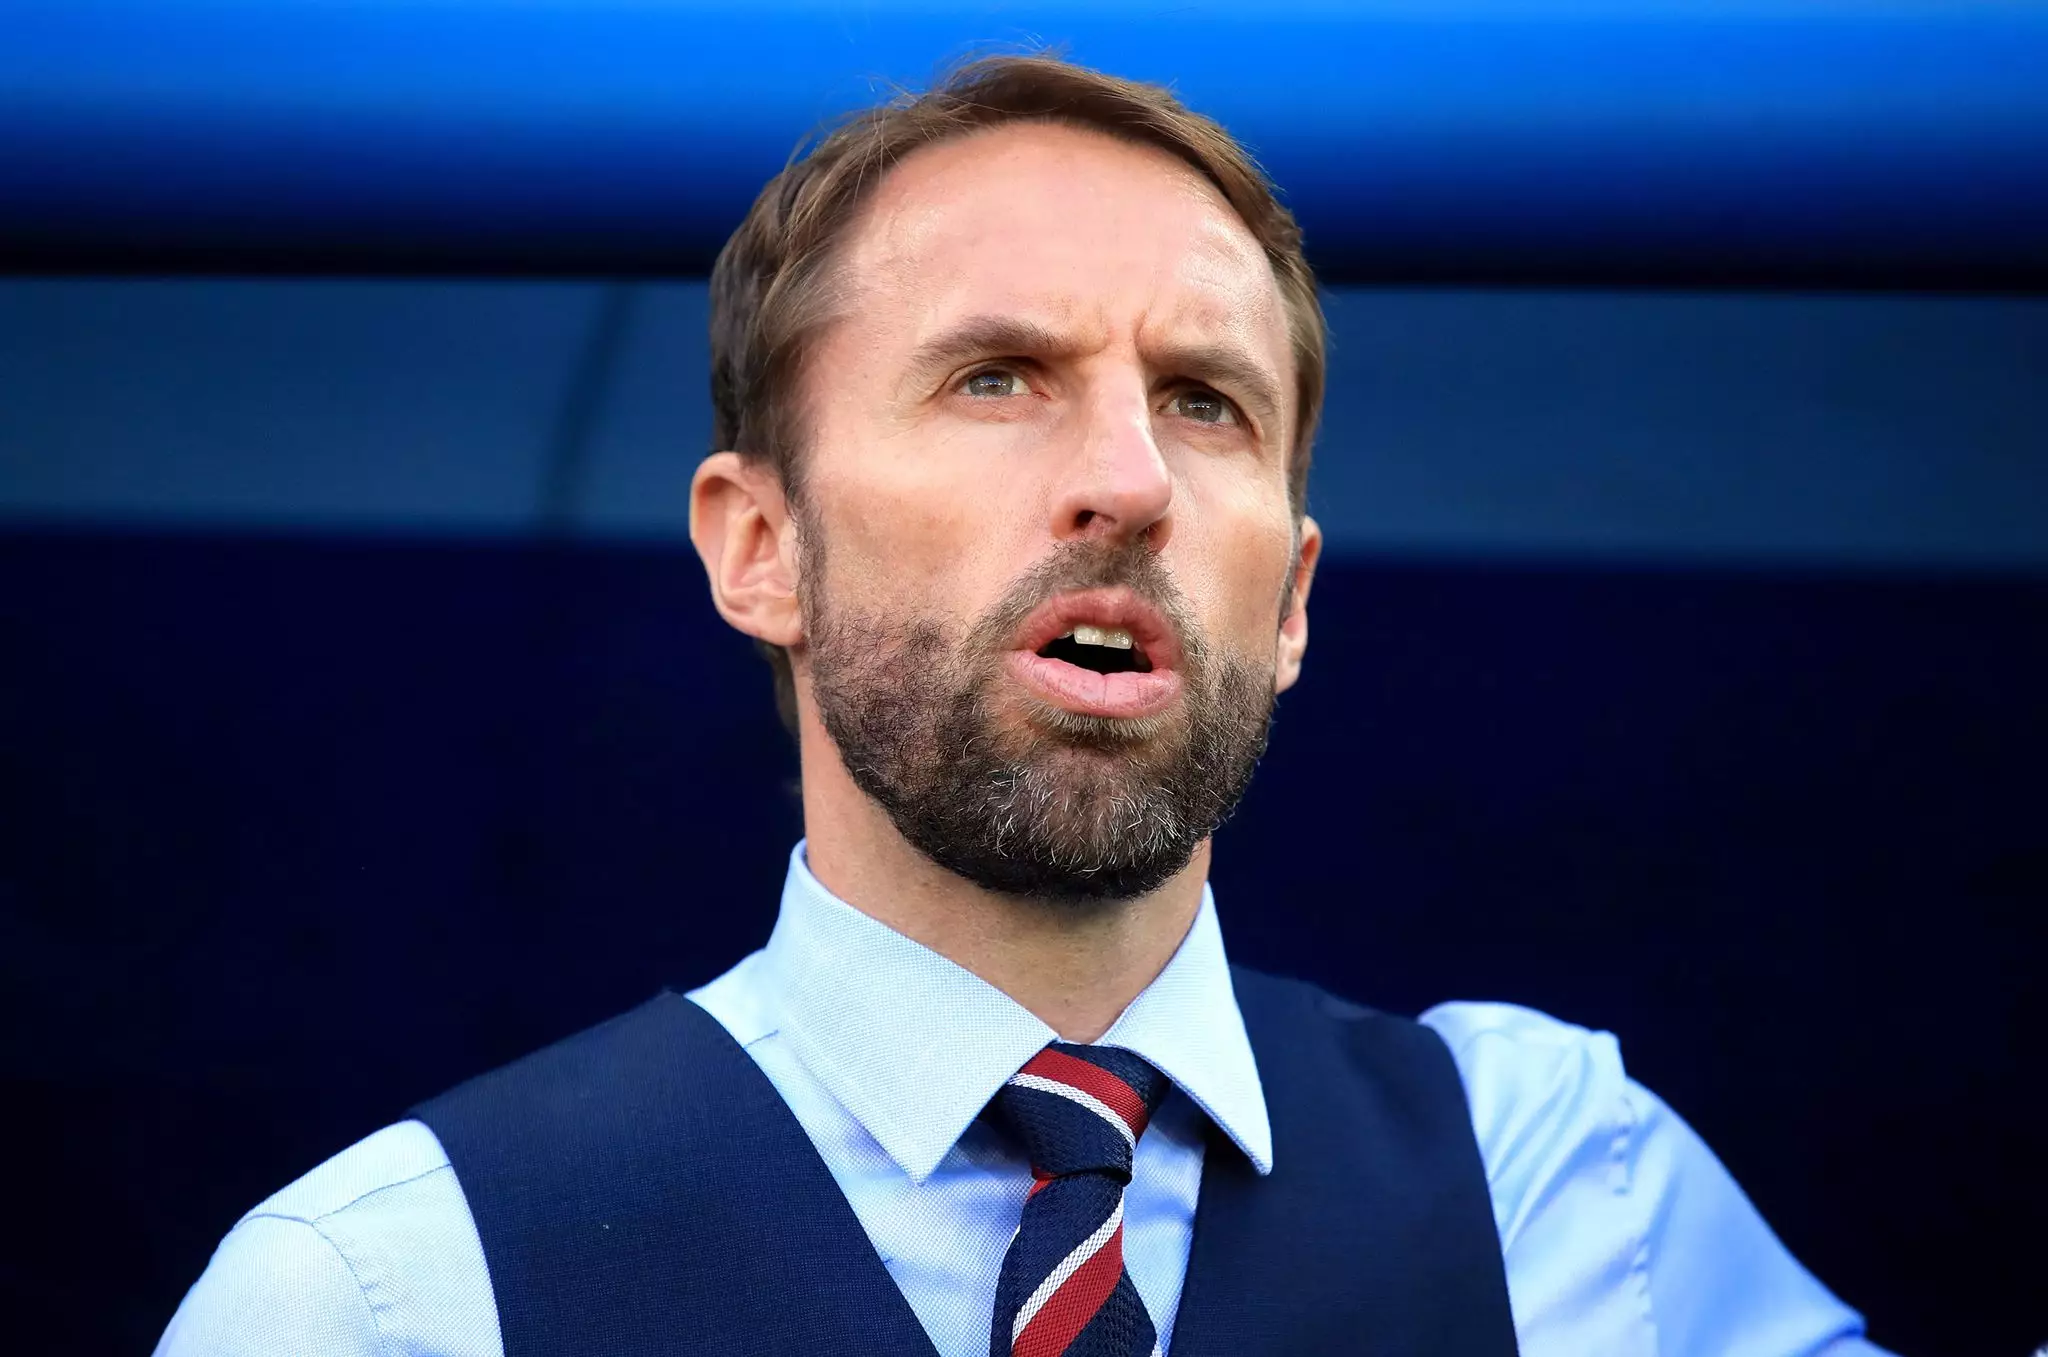 Southgate during the national anthem. Image: PA